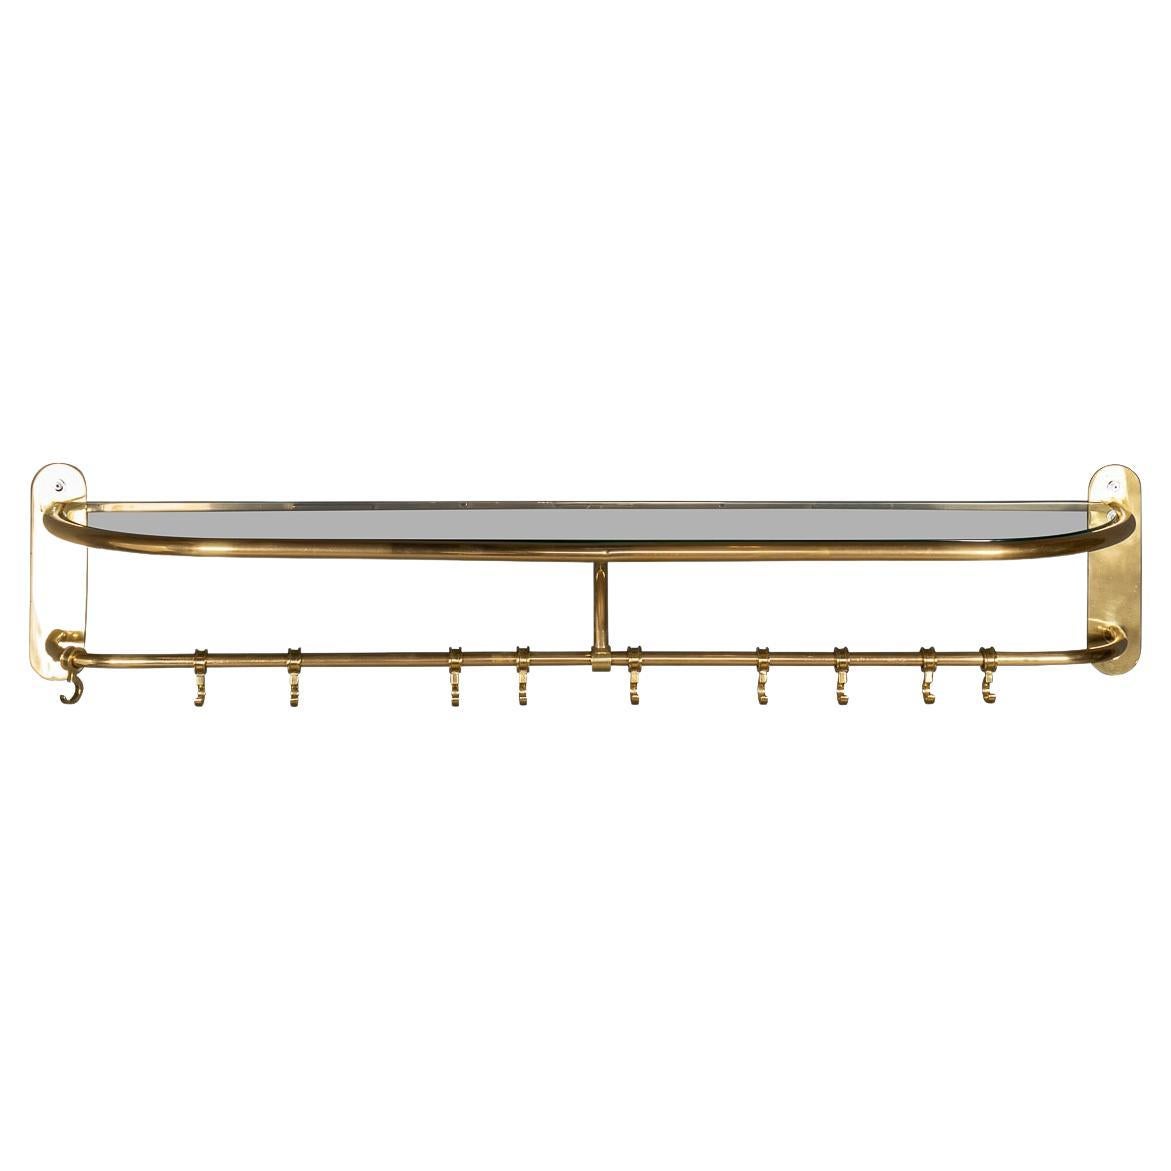 A Wall Mounted Brass Coat & Hat Rack